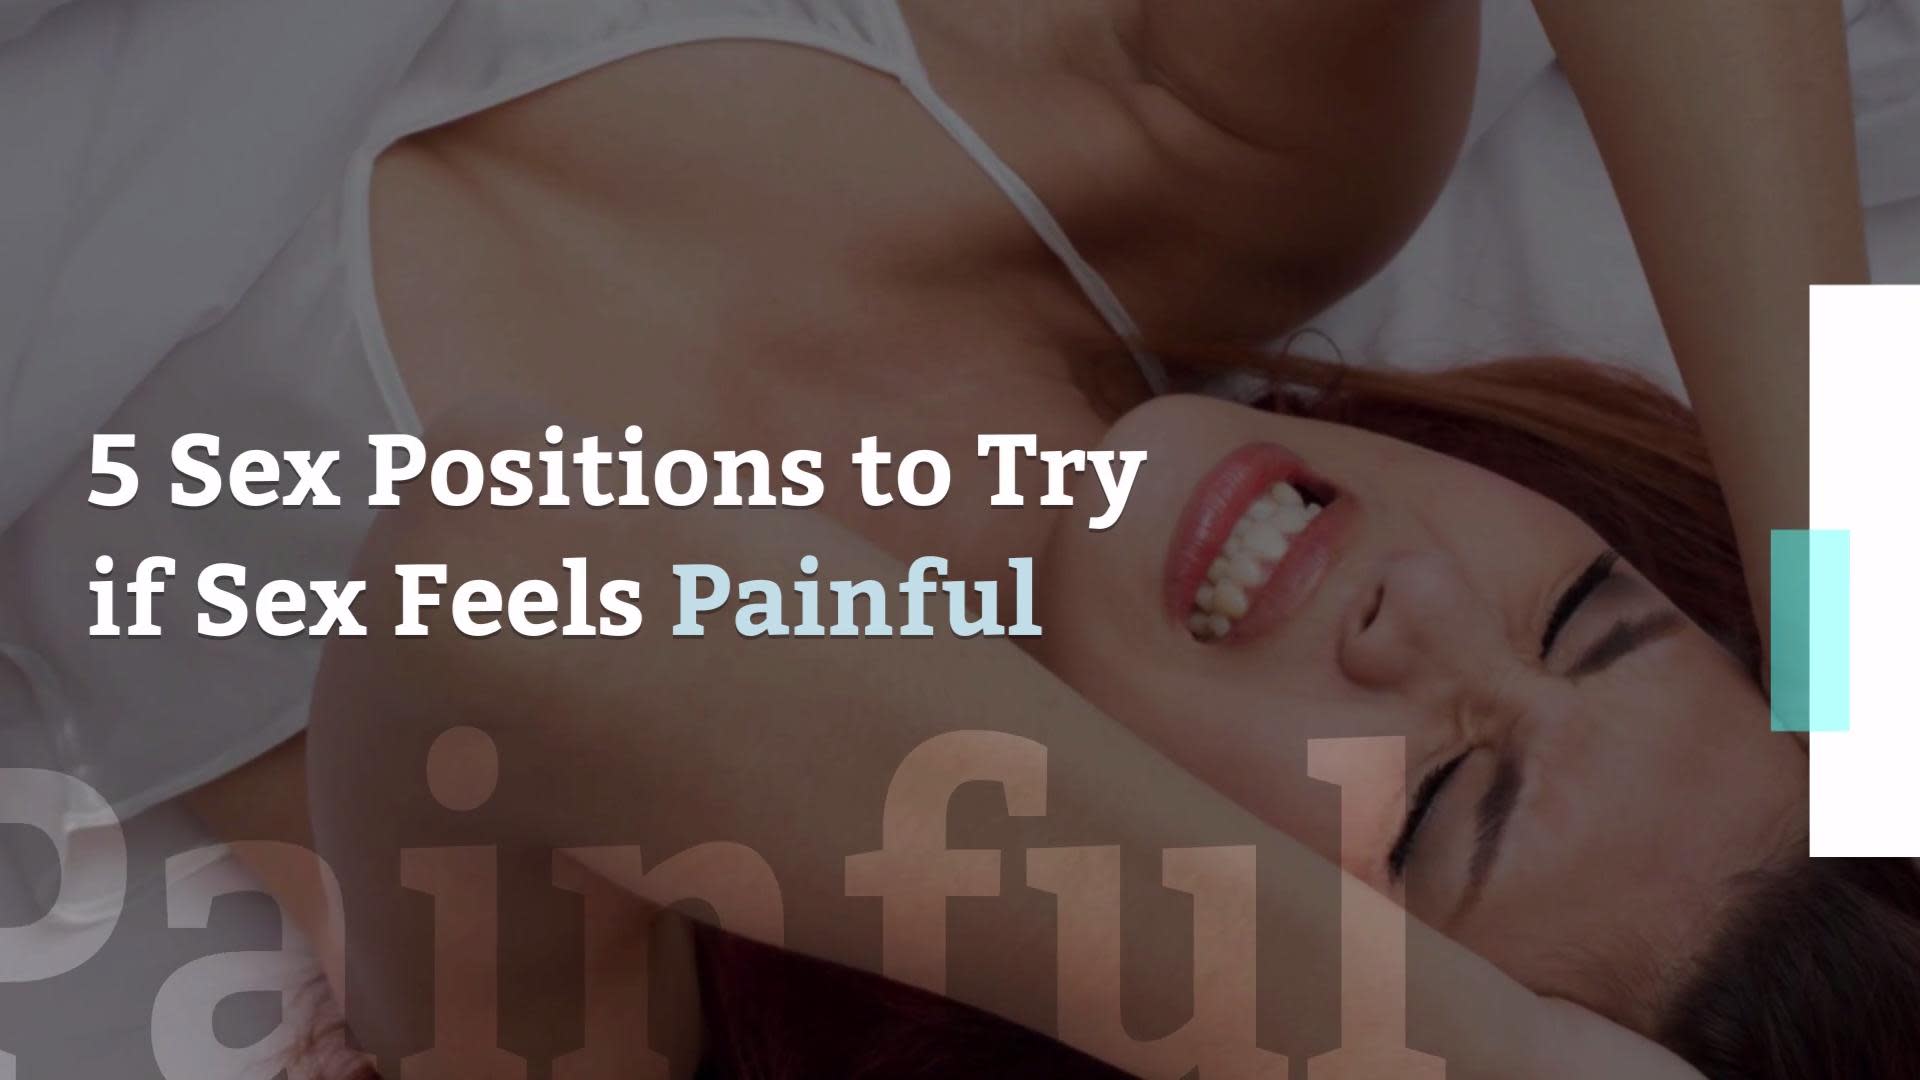 6 Sex Positions to Try if Sex Is Painful pic picture